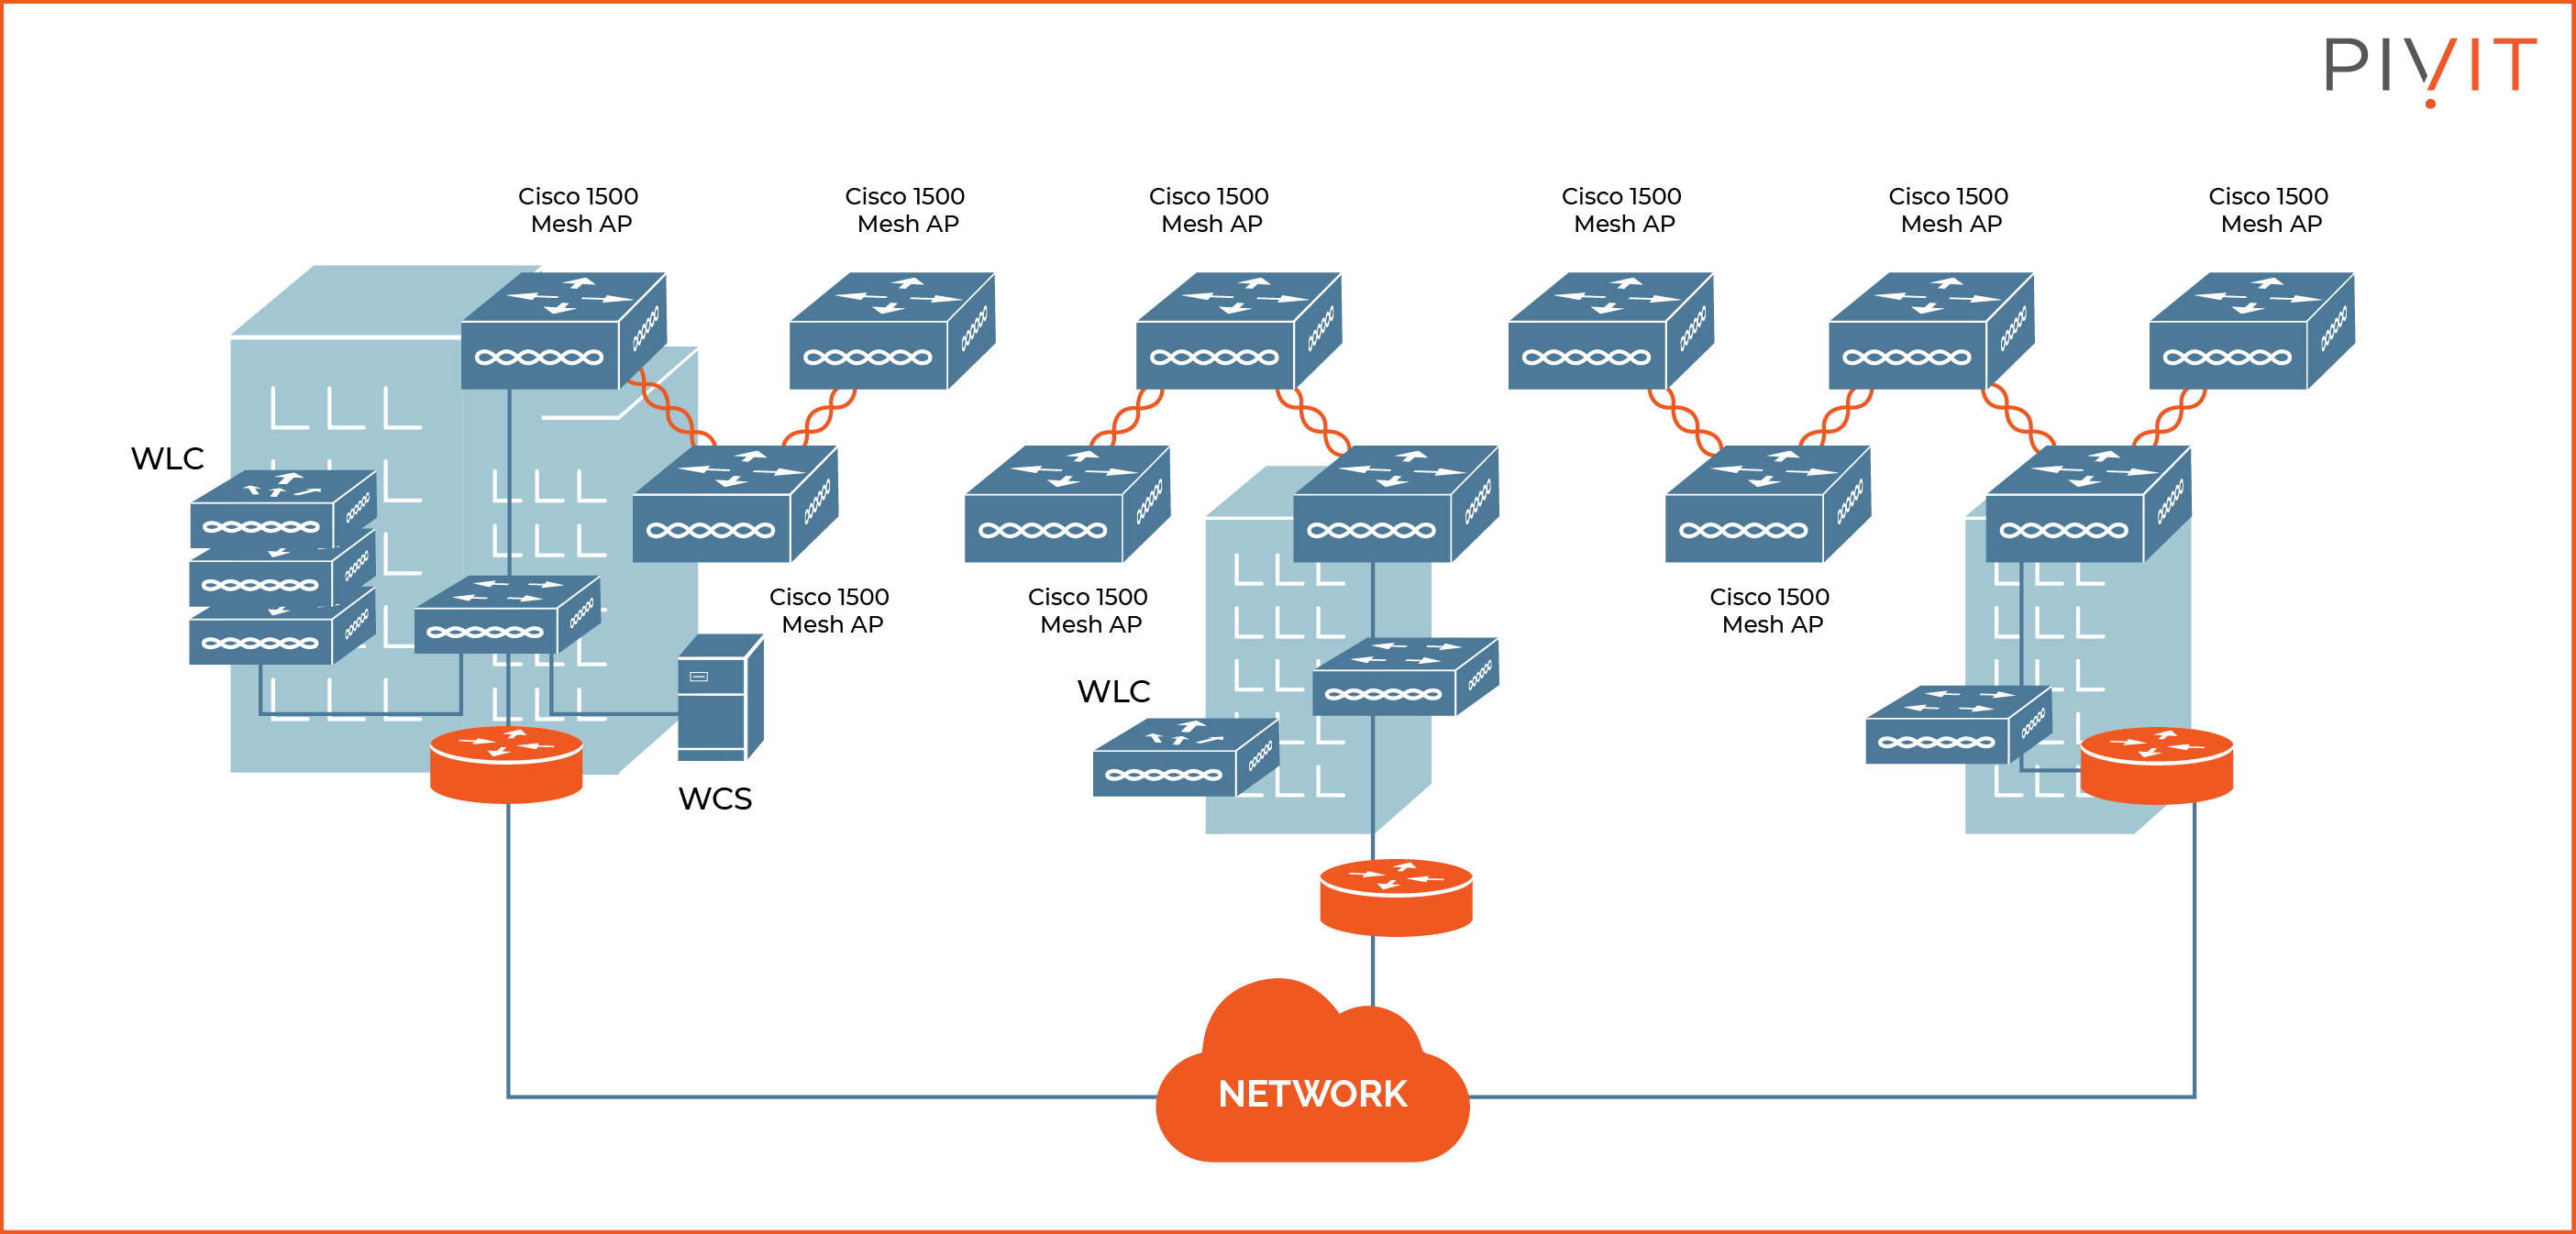 Cisco Mesh Network with 1500 AP from PivIT Global